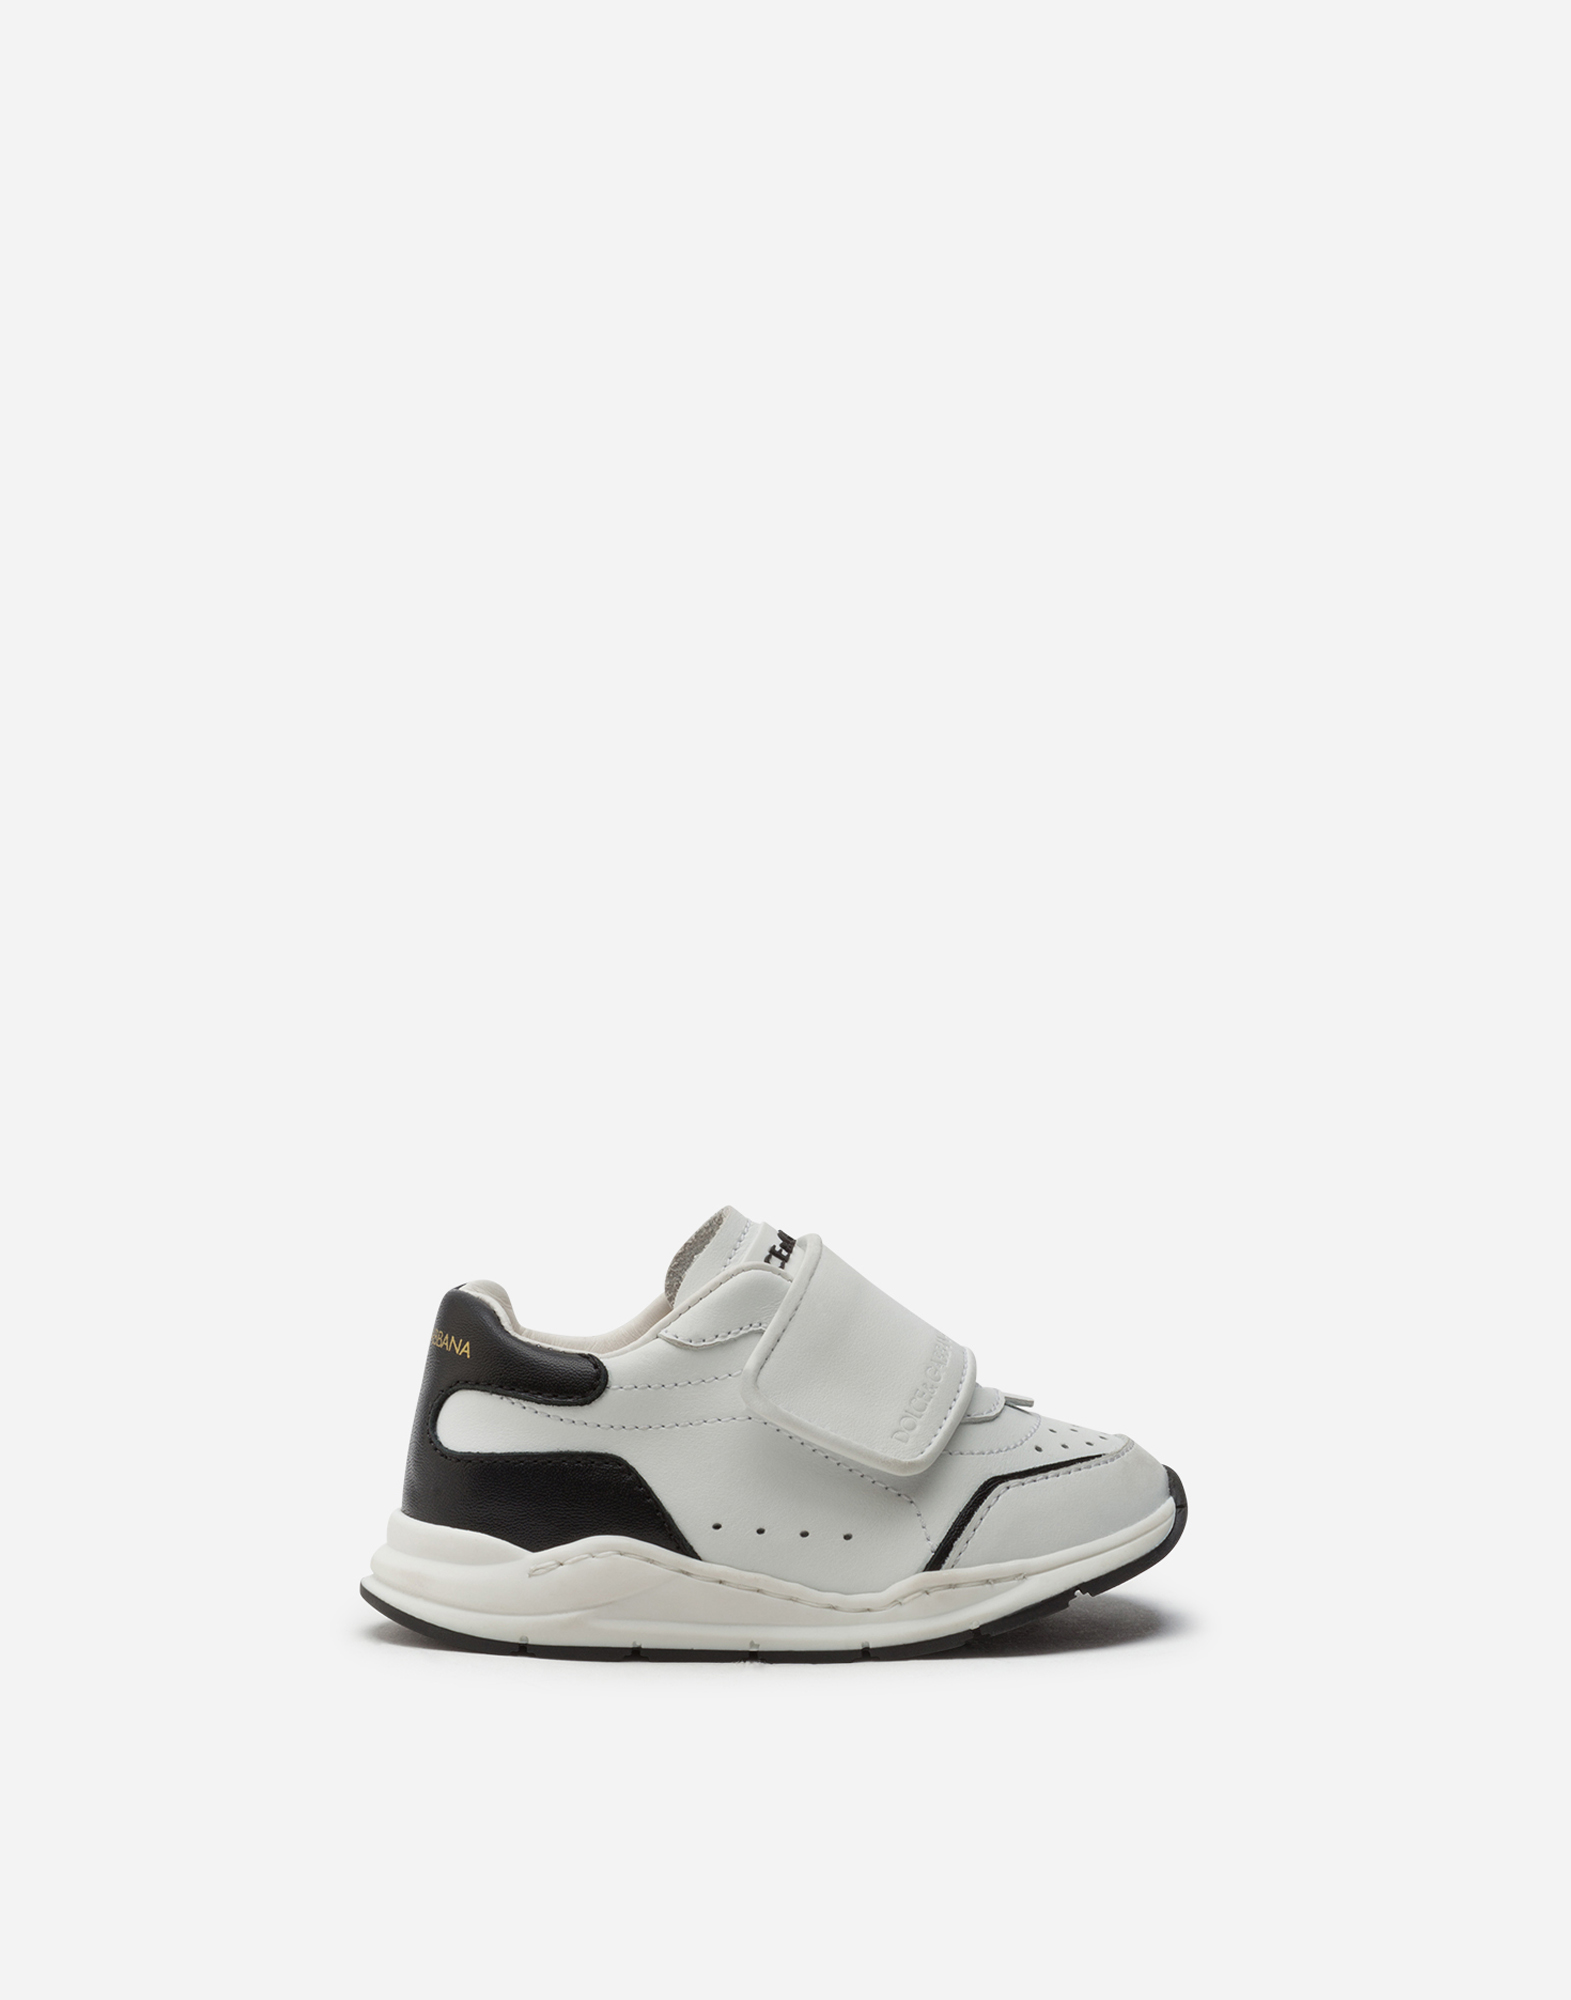 Daymaster sneakers with riptape closure in nappa calfskin in White/Black